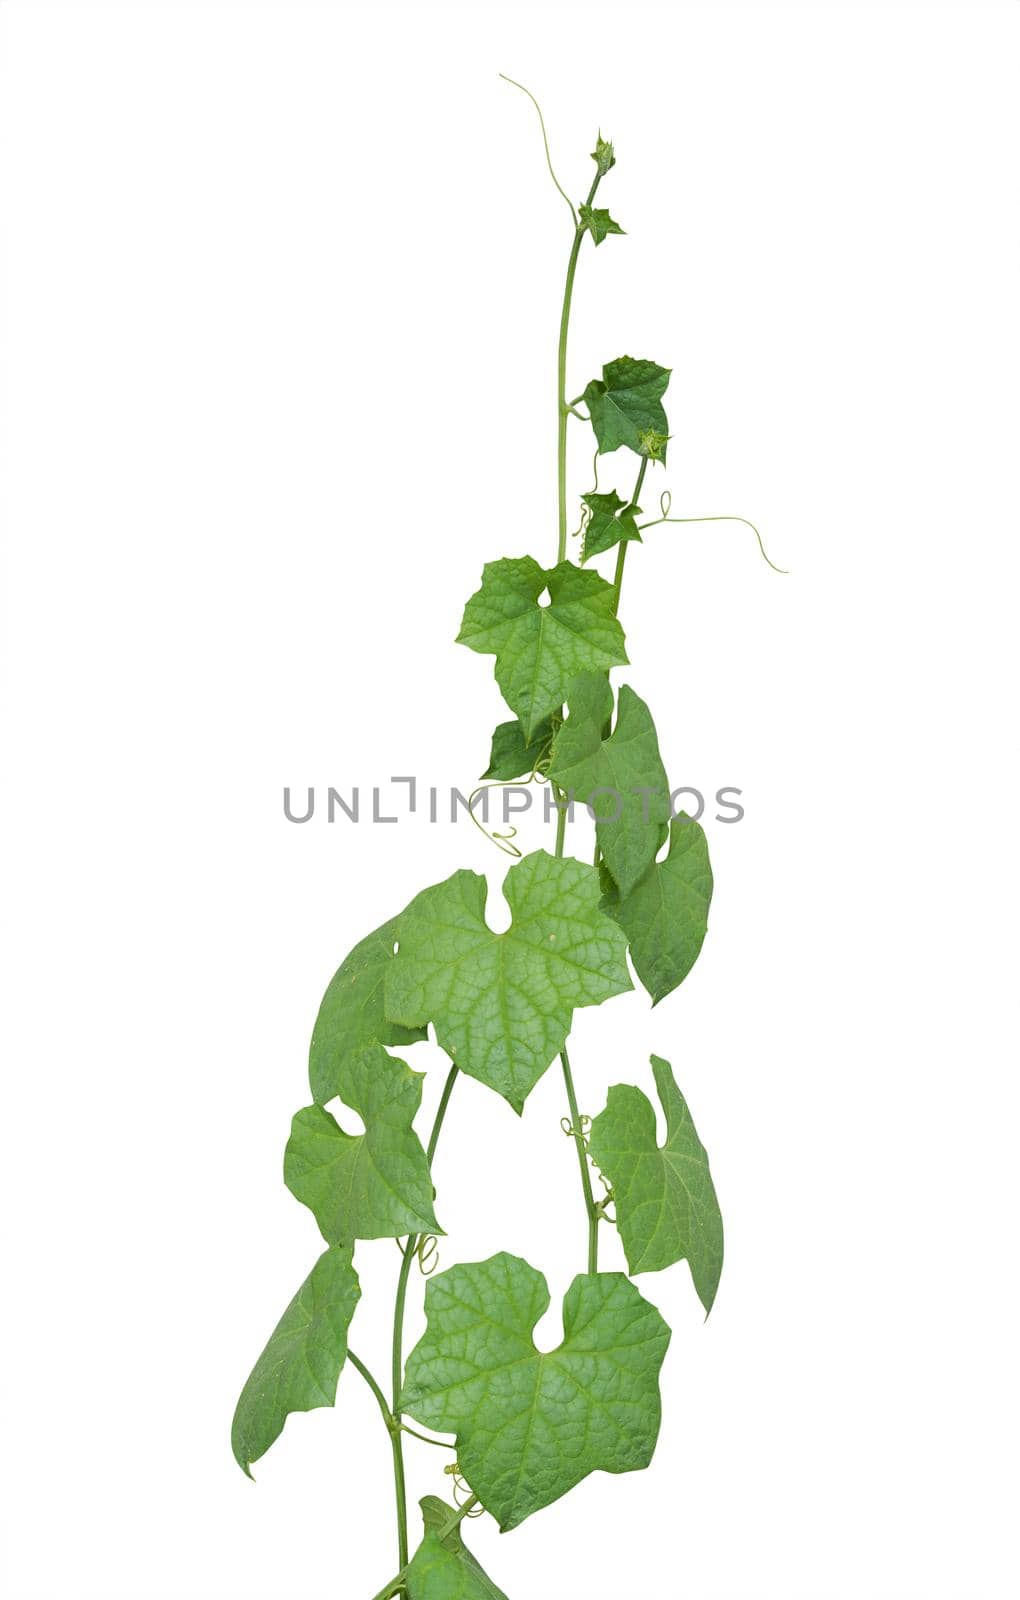 vine plants isolated on white background. clipping path